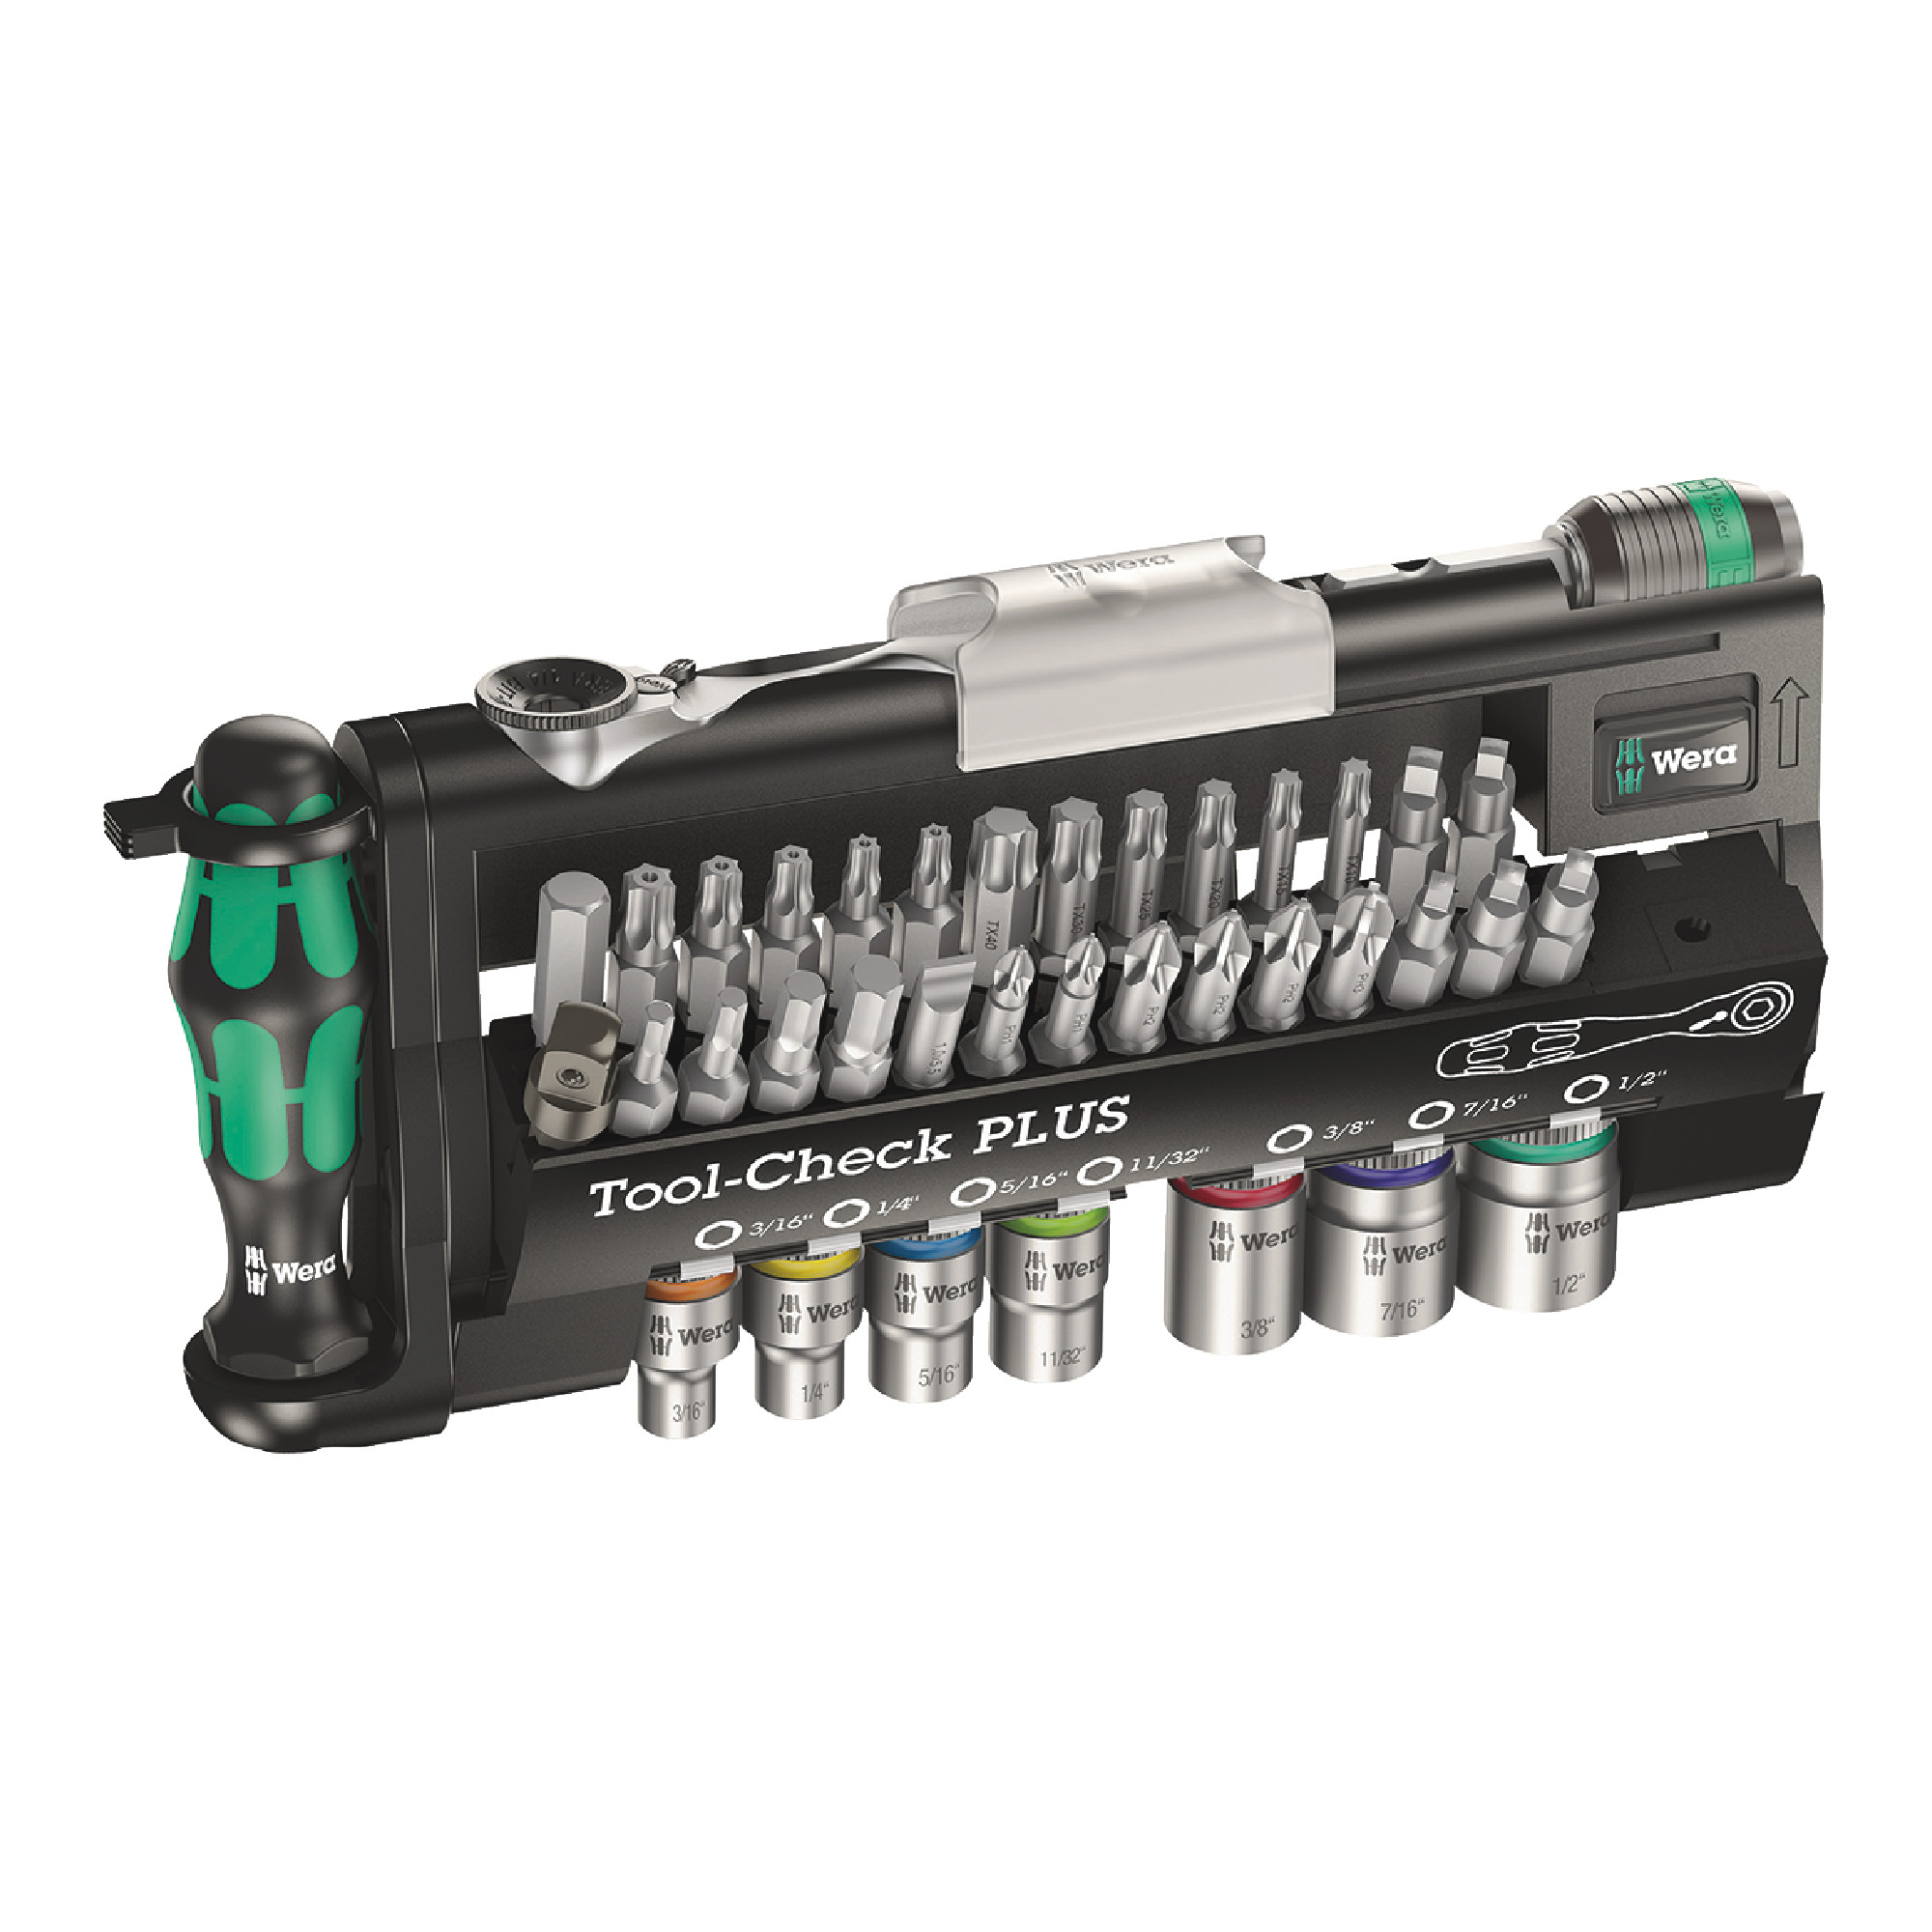 Tool-Check PLUS Bit Ratchet Set with Sockets - Inch